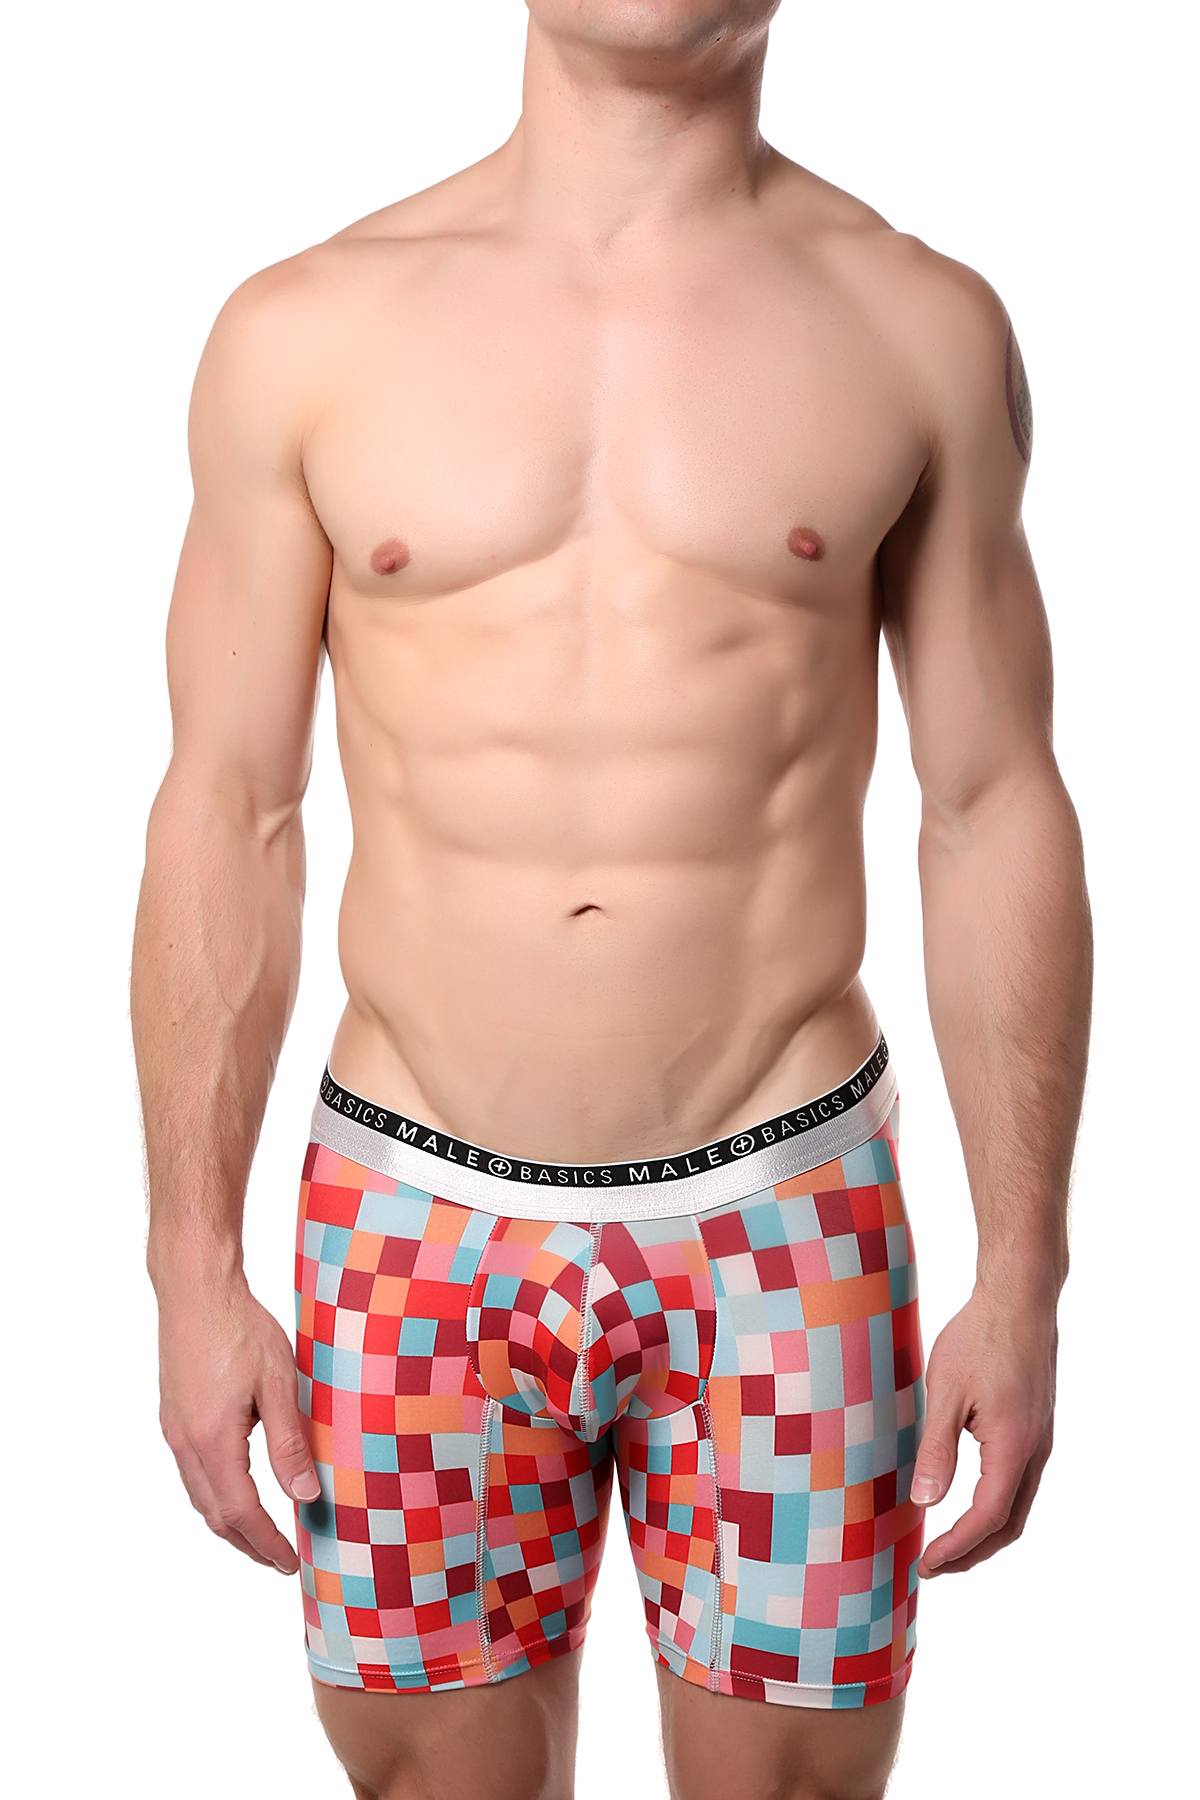 Male Basics Red Pixels Hipster Boxer Brief